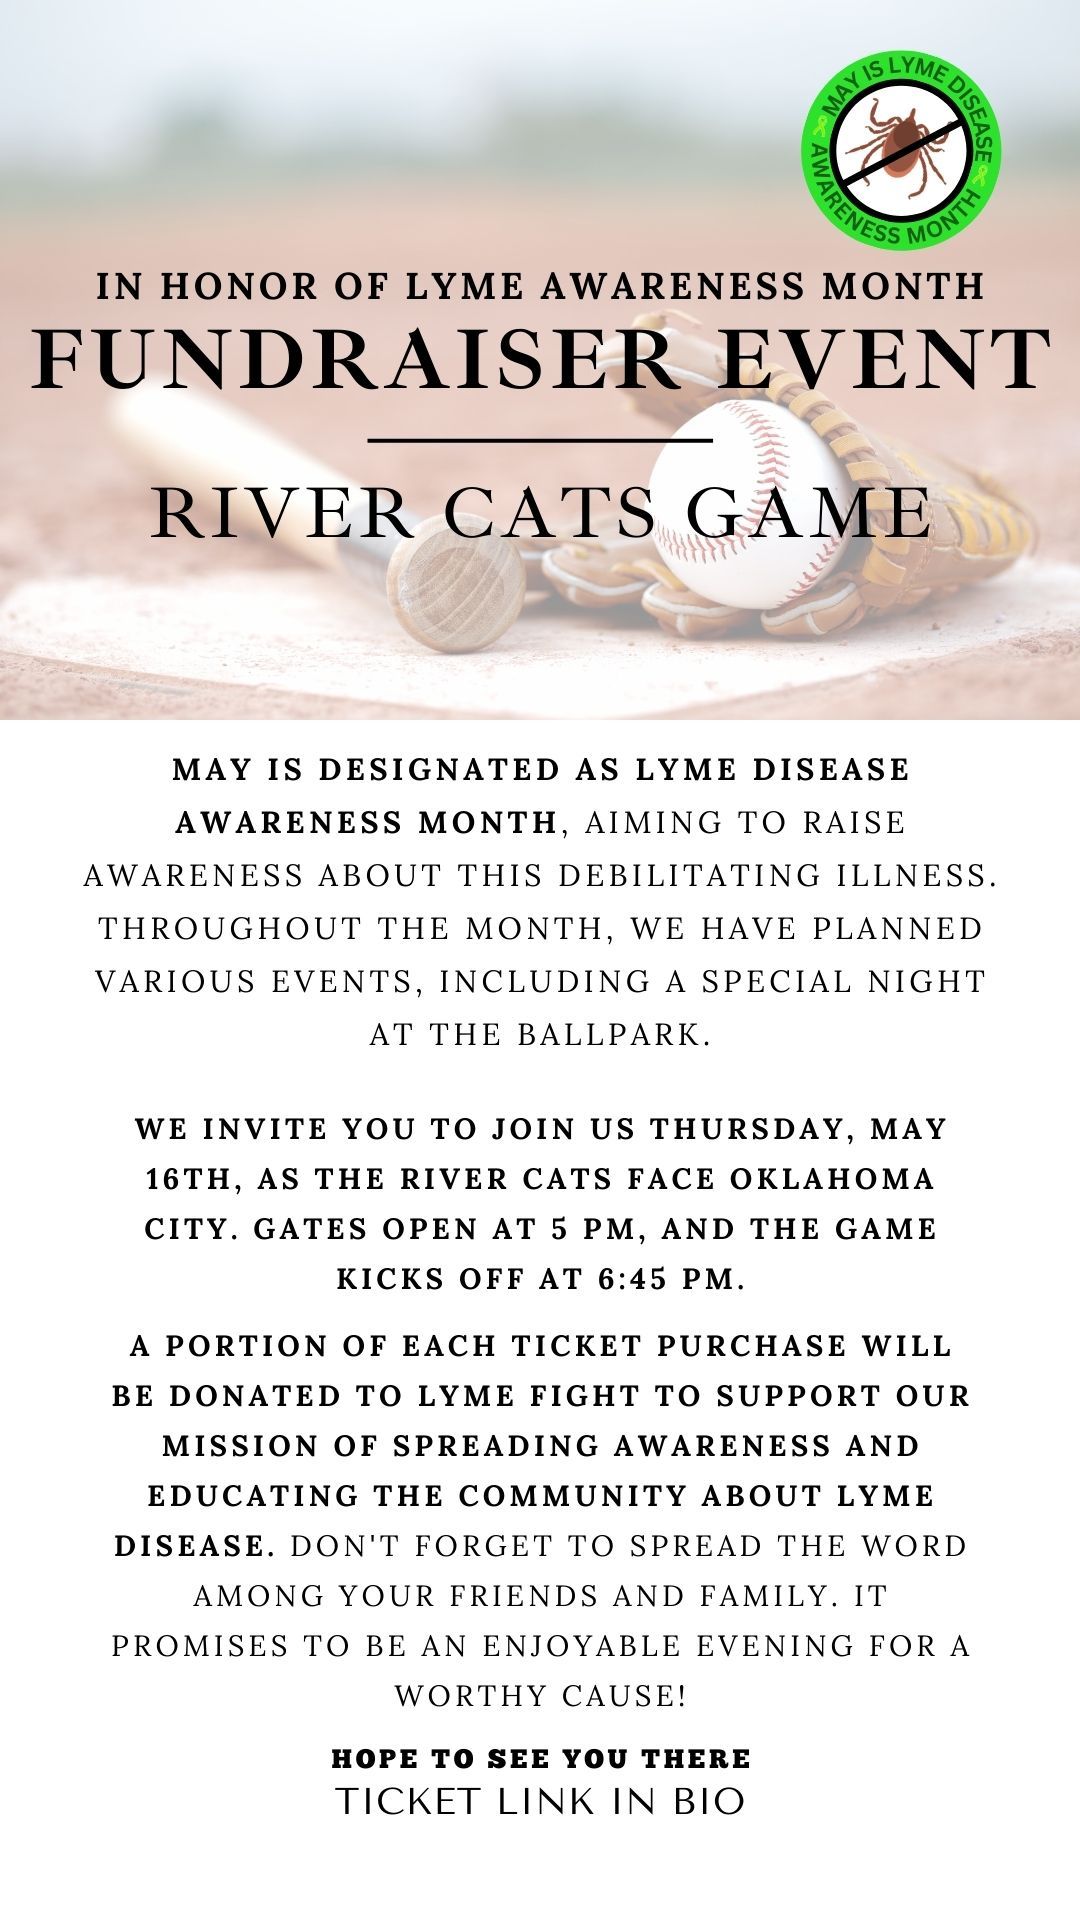 In honor of Lyme Disease Awareness Month - River Cats Game Fundraiser